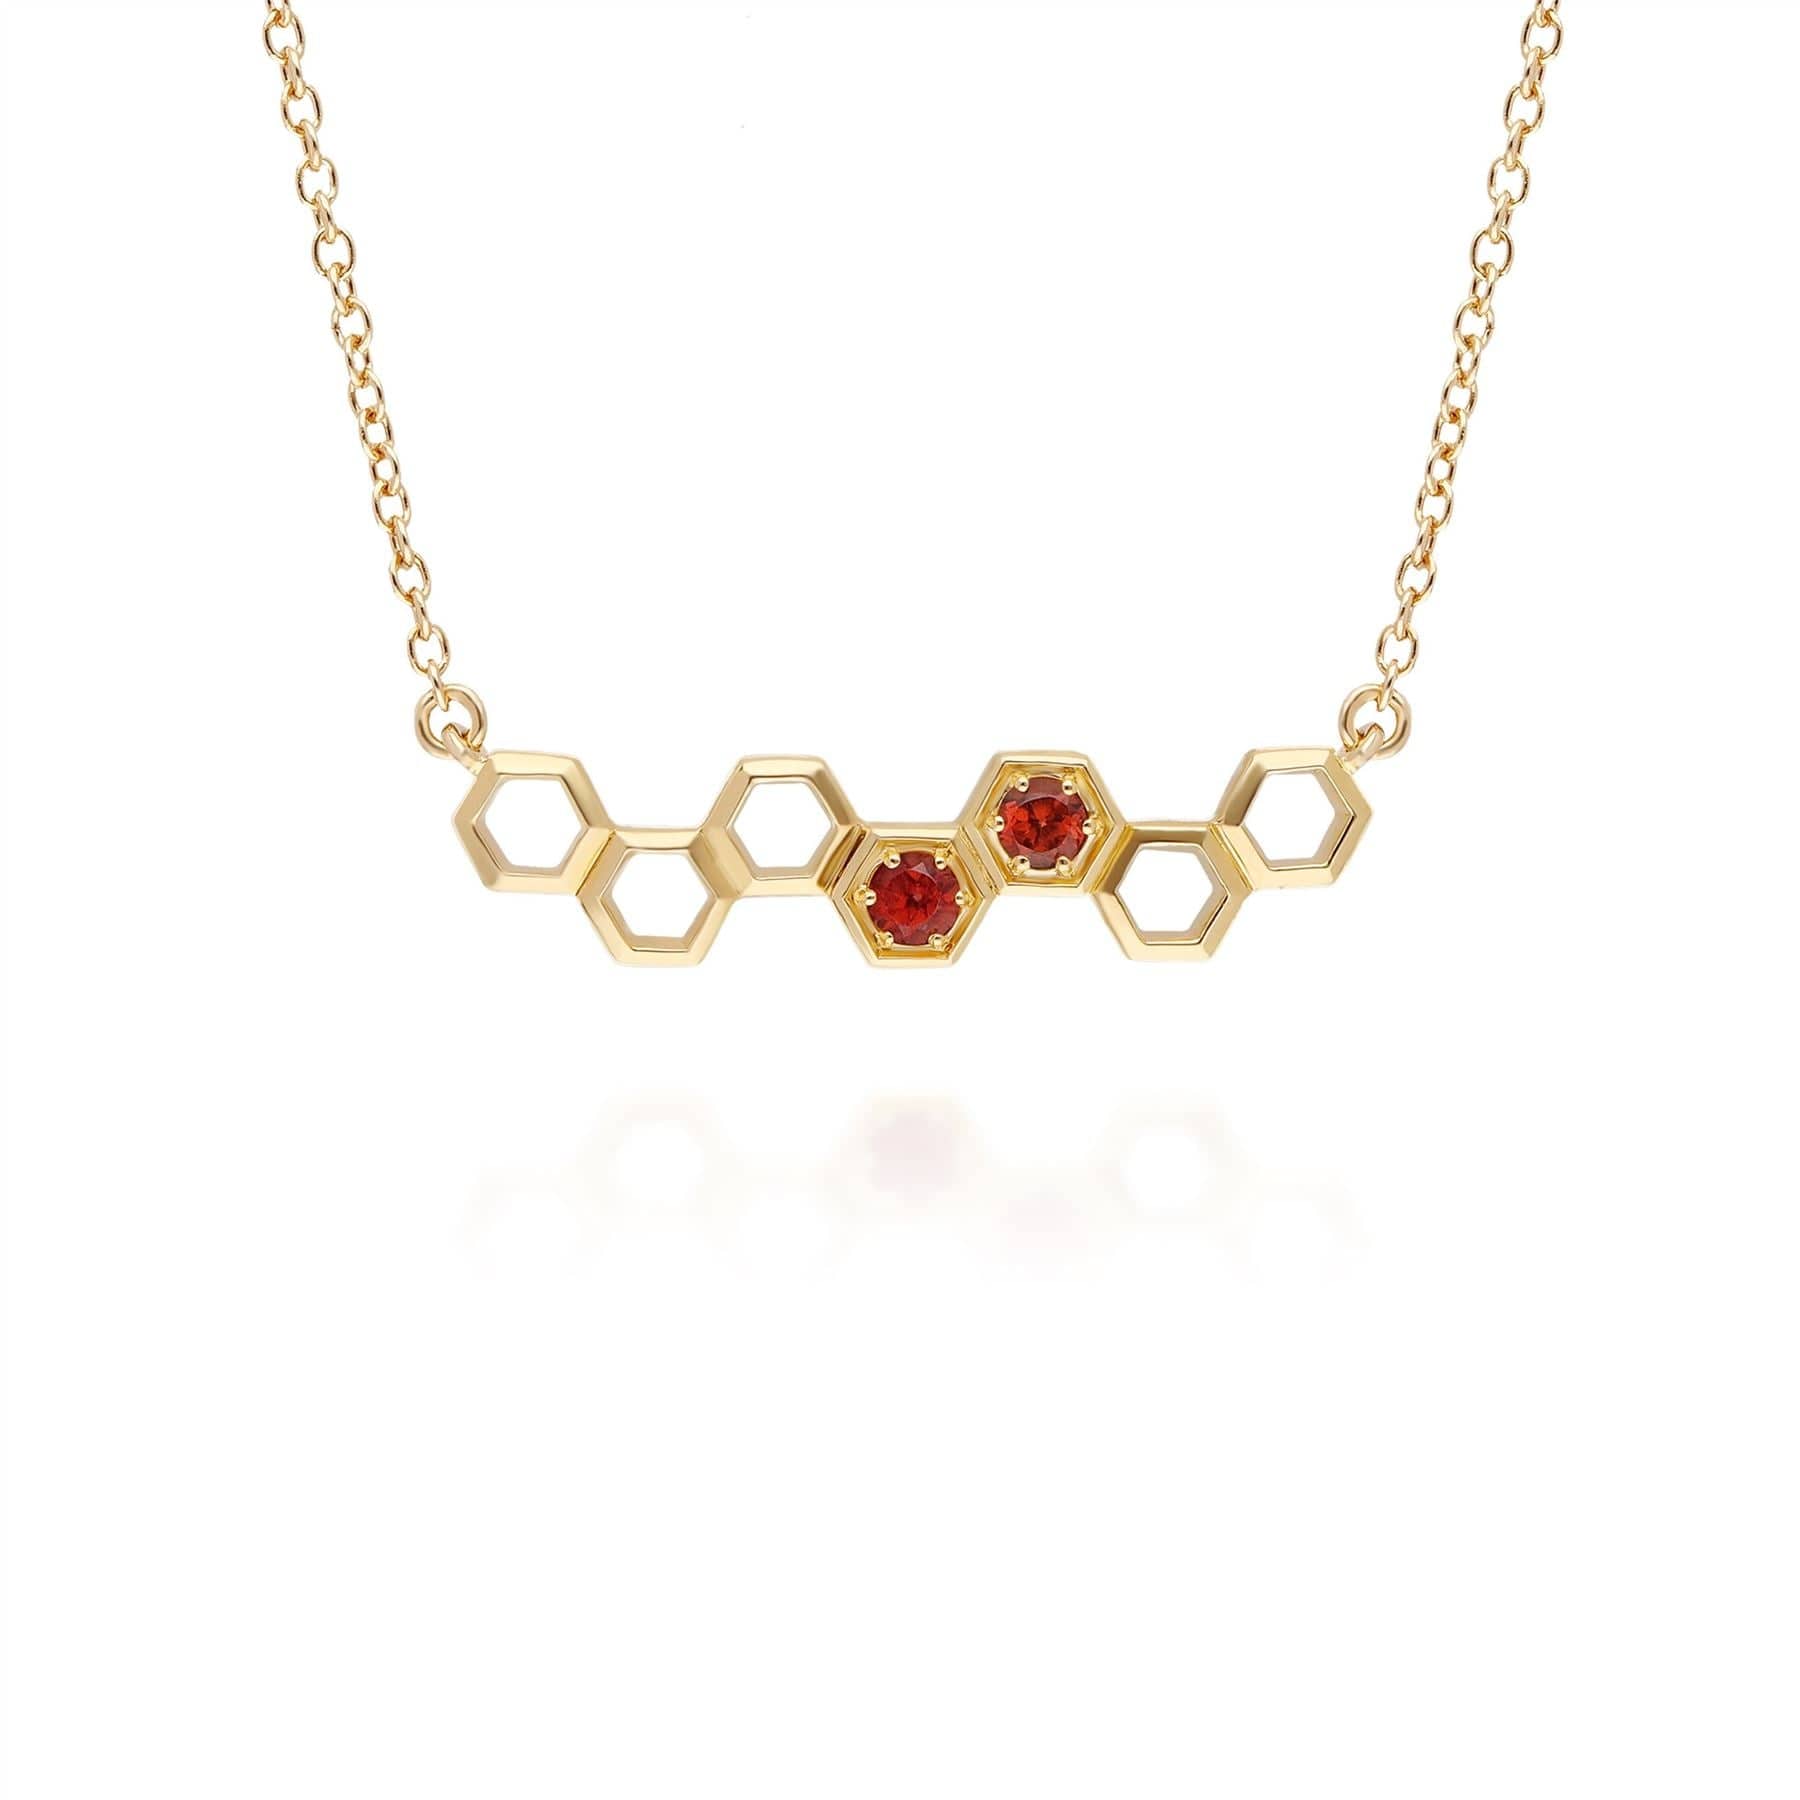 Photos - Pendant / Choker Necklace Honeycomb Inspired Garnet Link Necklace in 9ct Yellow Gold